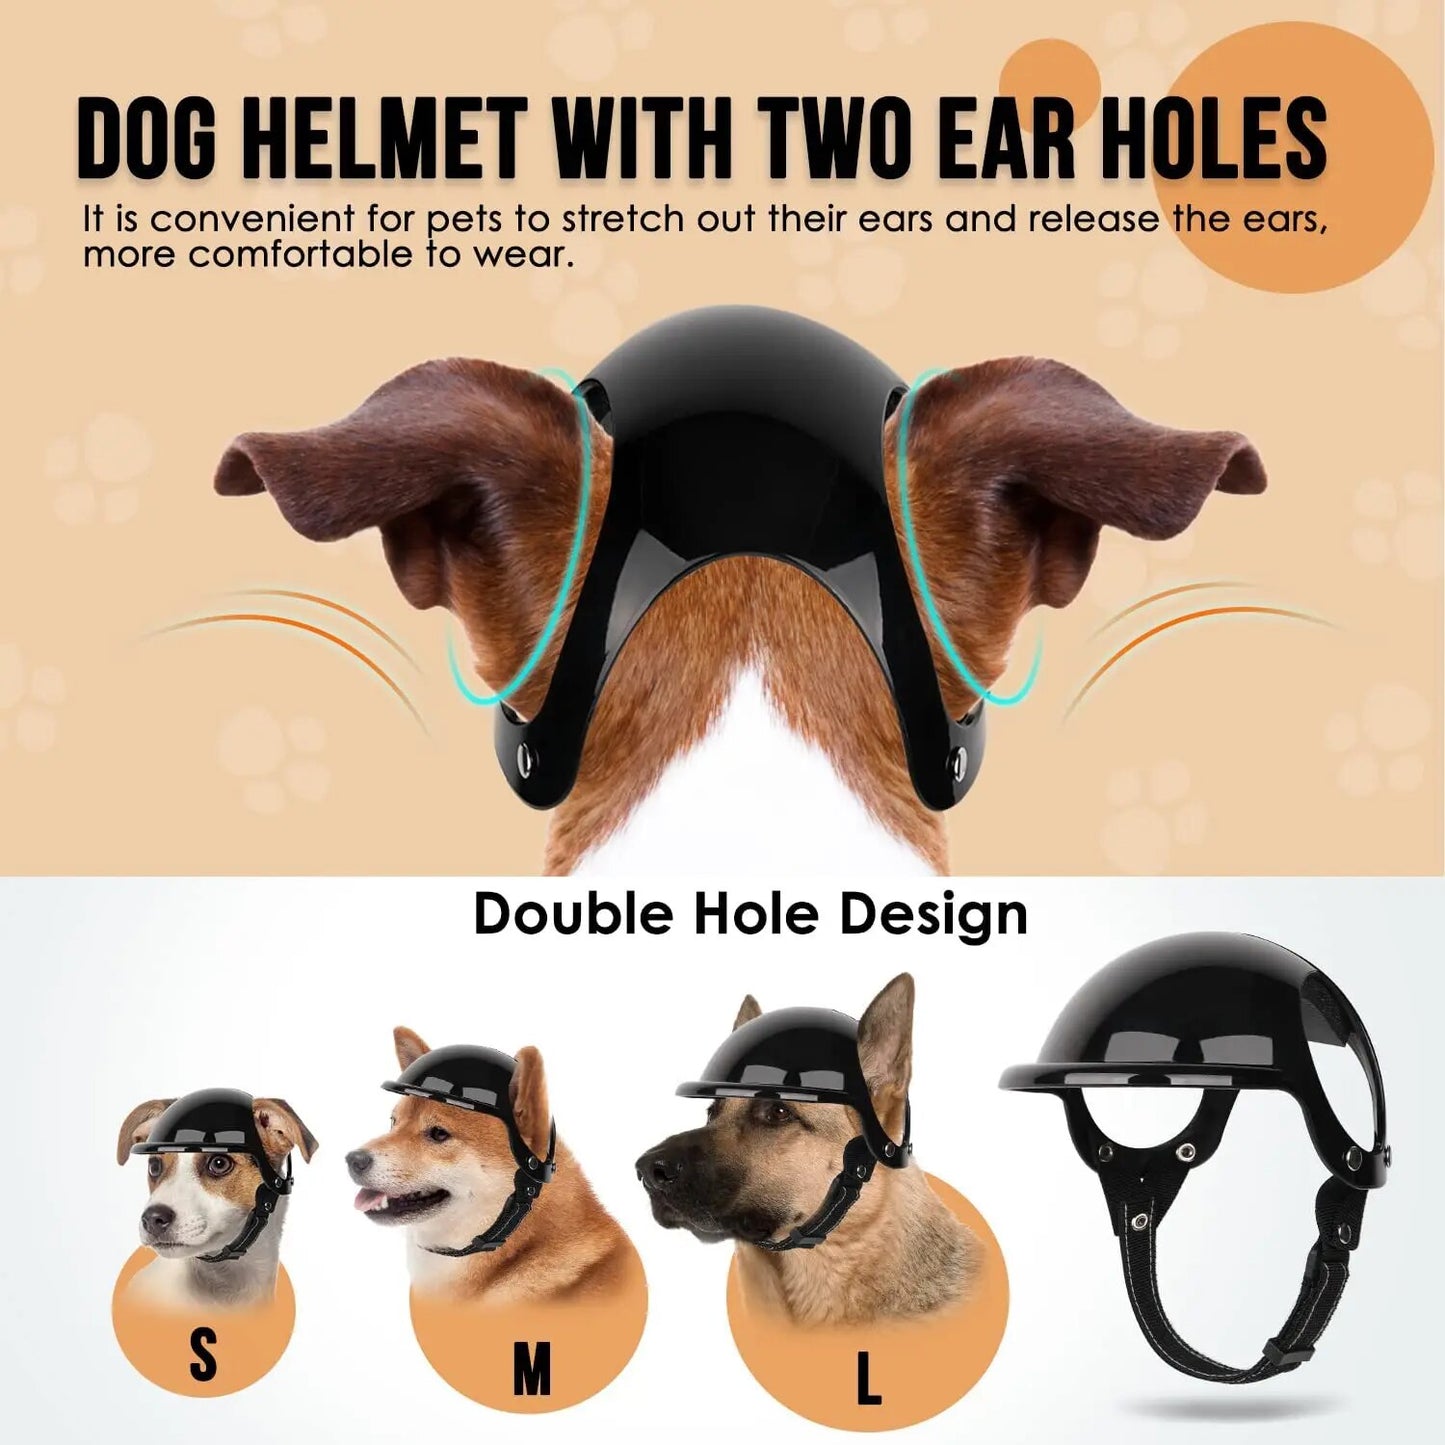 Dog Helmet And Goggles